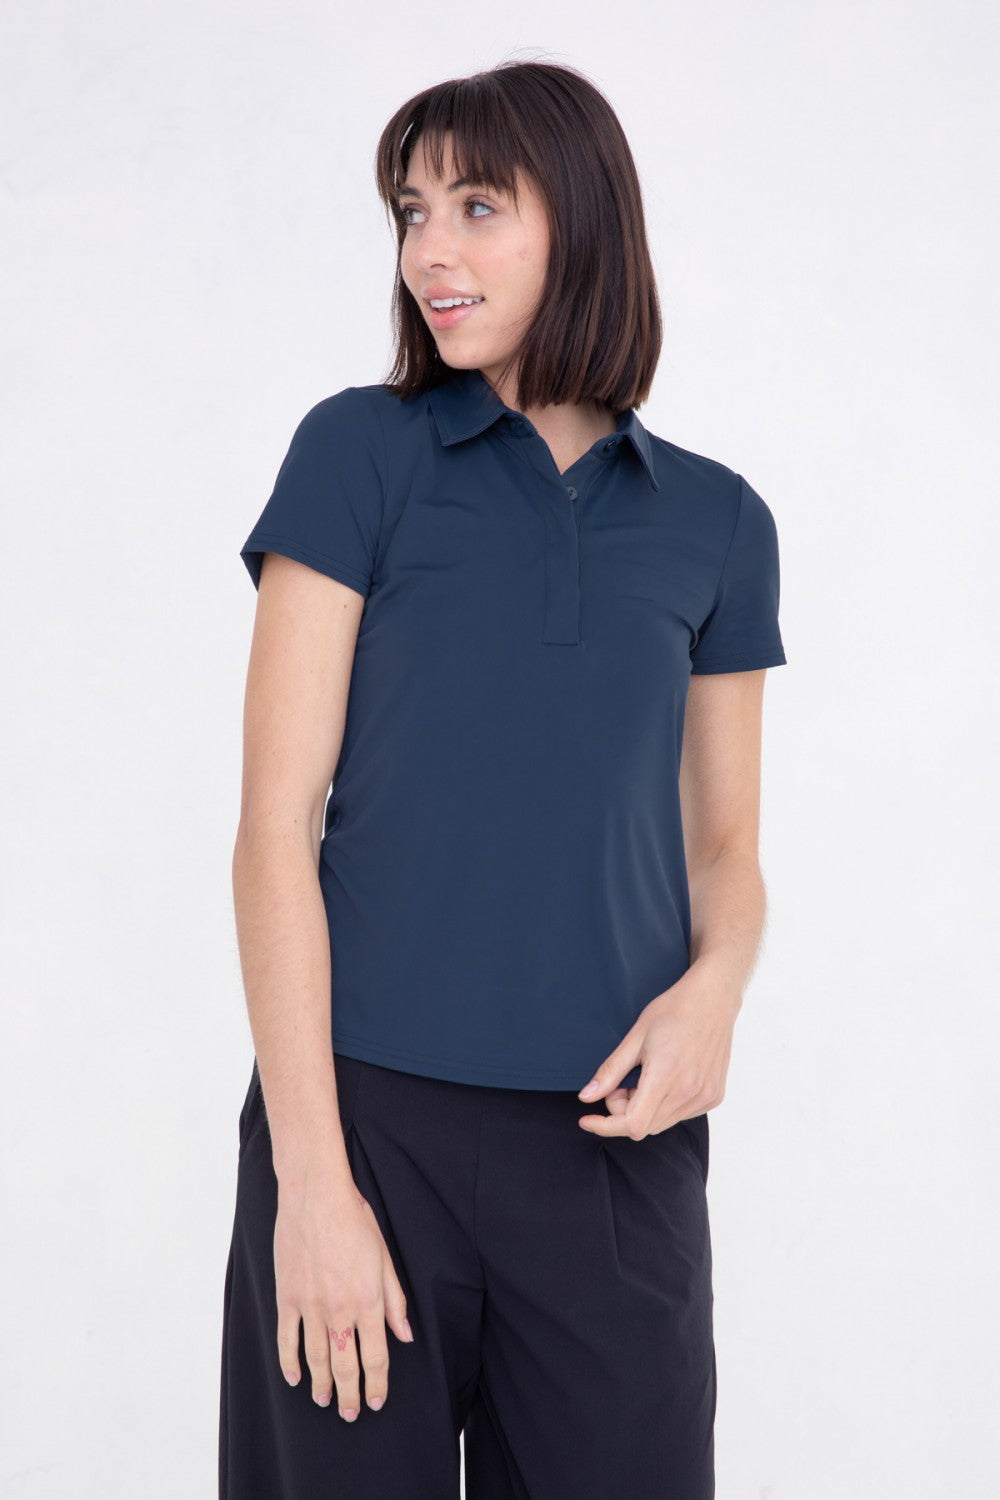 Hole In One Golf Shirt-Navy